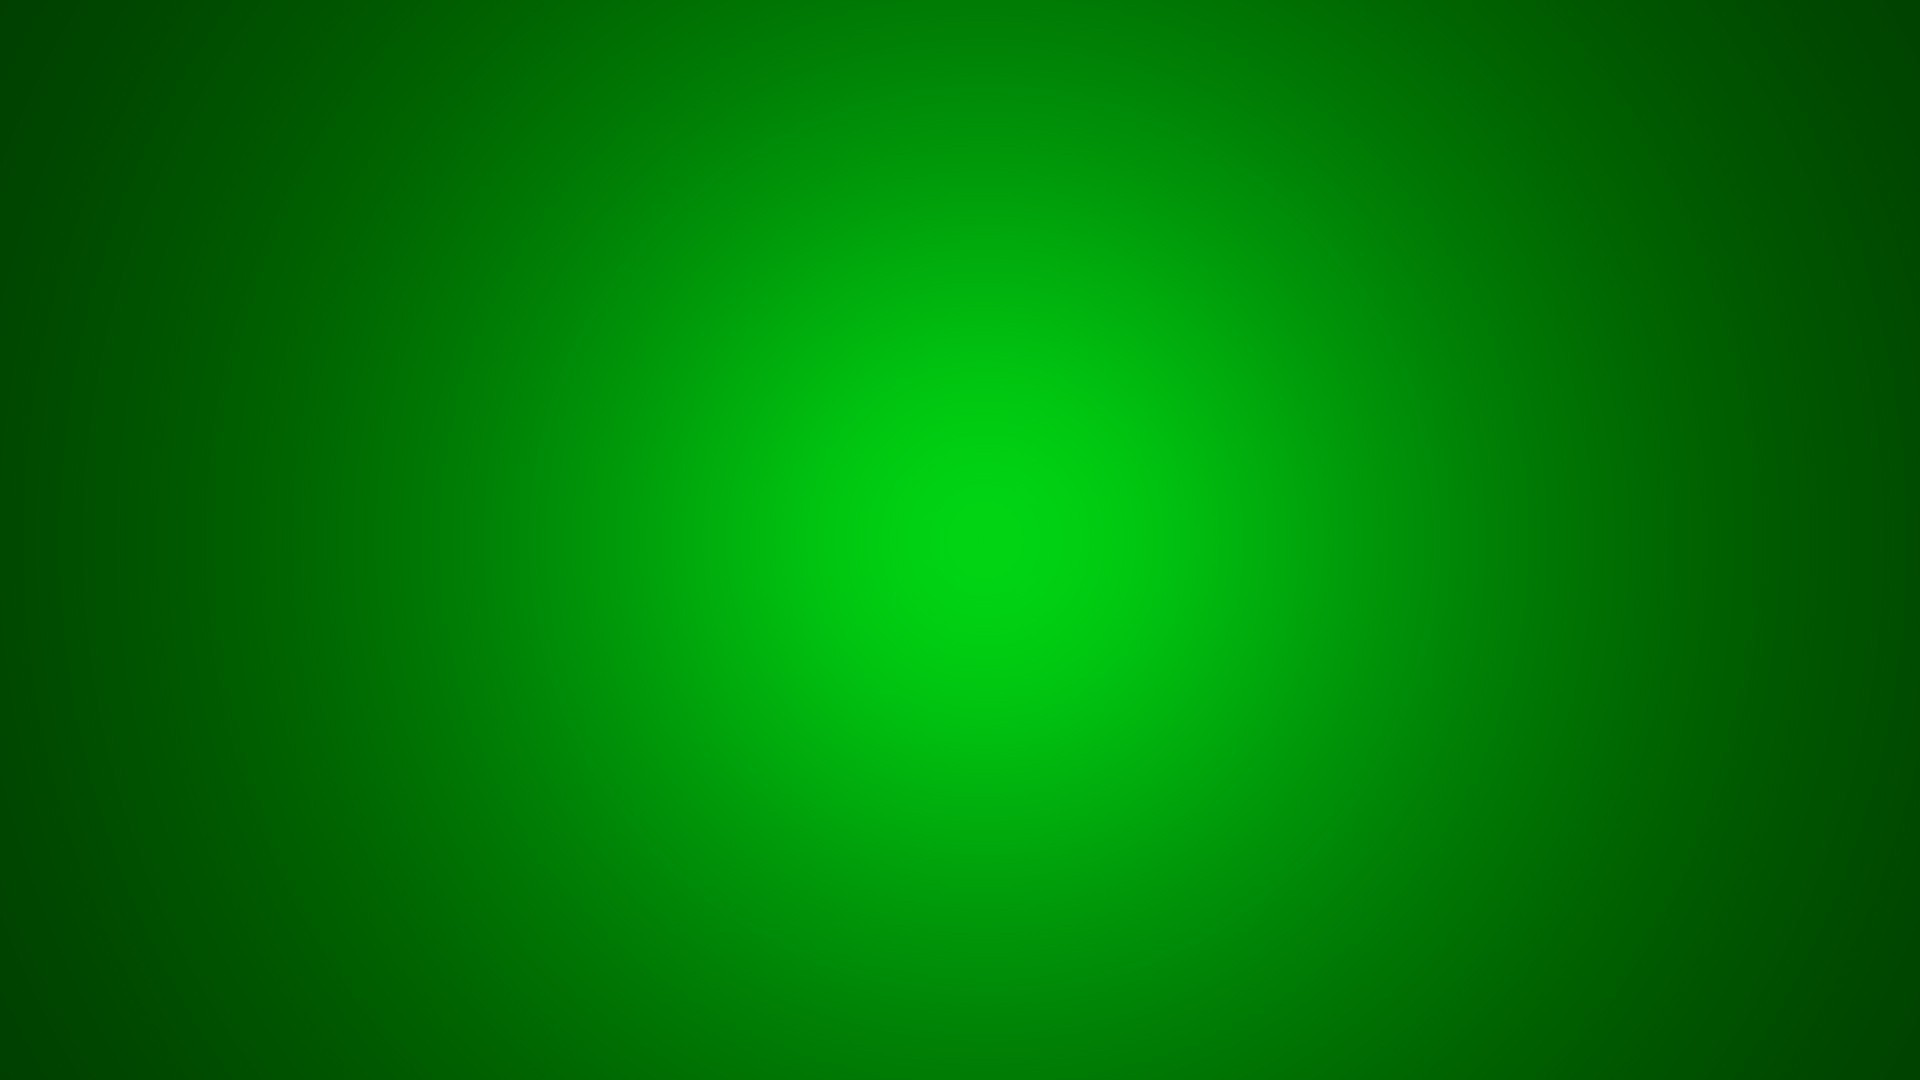 Wallpaper Neon Green HD With Resolution 1920X1080 pixel. You can make this wallpaper for your Desktop Computer Backgrounds, Mac Wallpapers, Android Lock screen or iPhone Screensavers